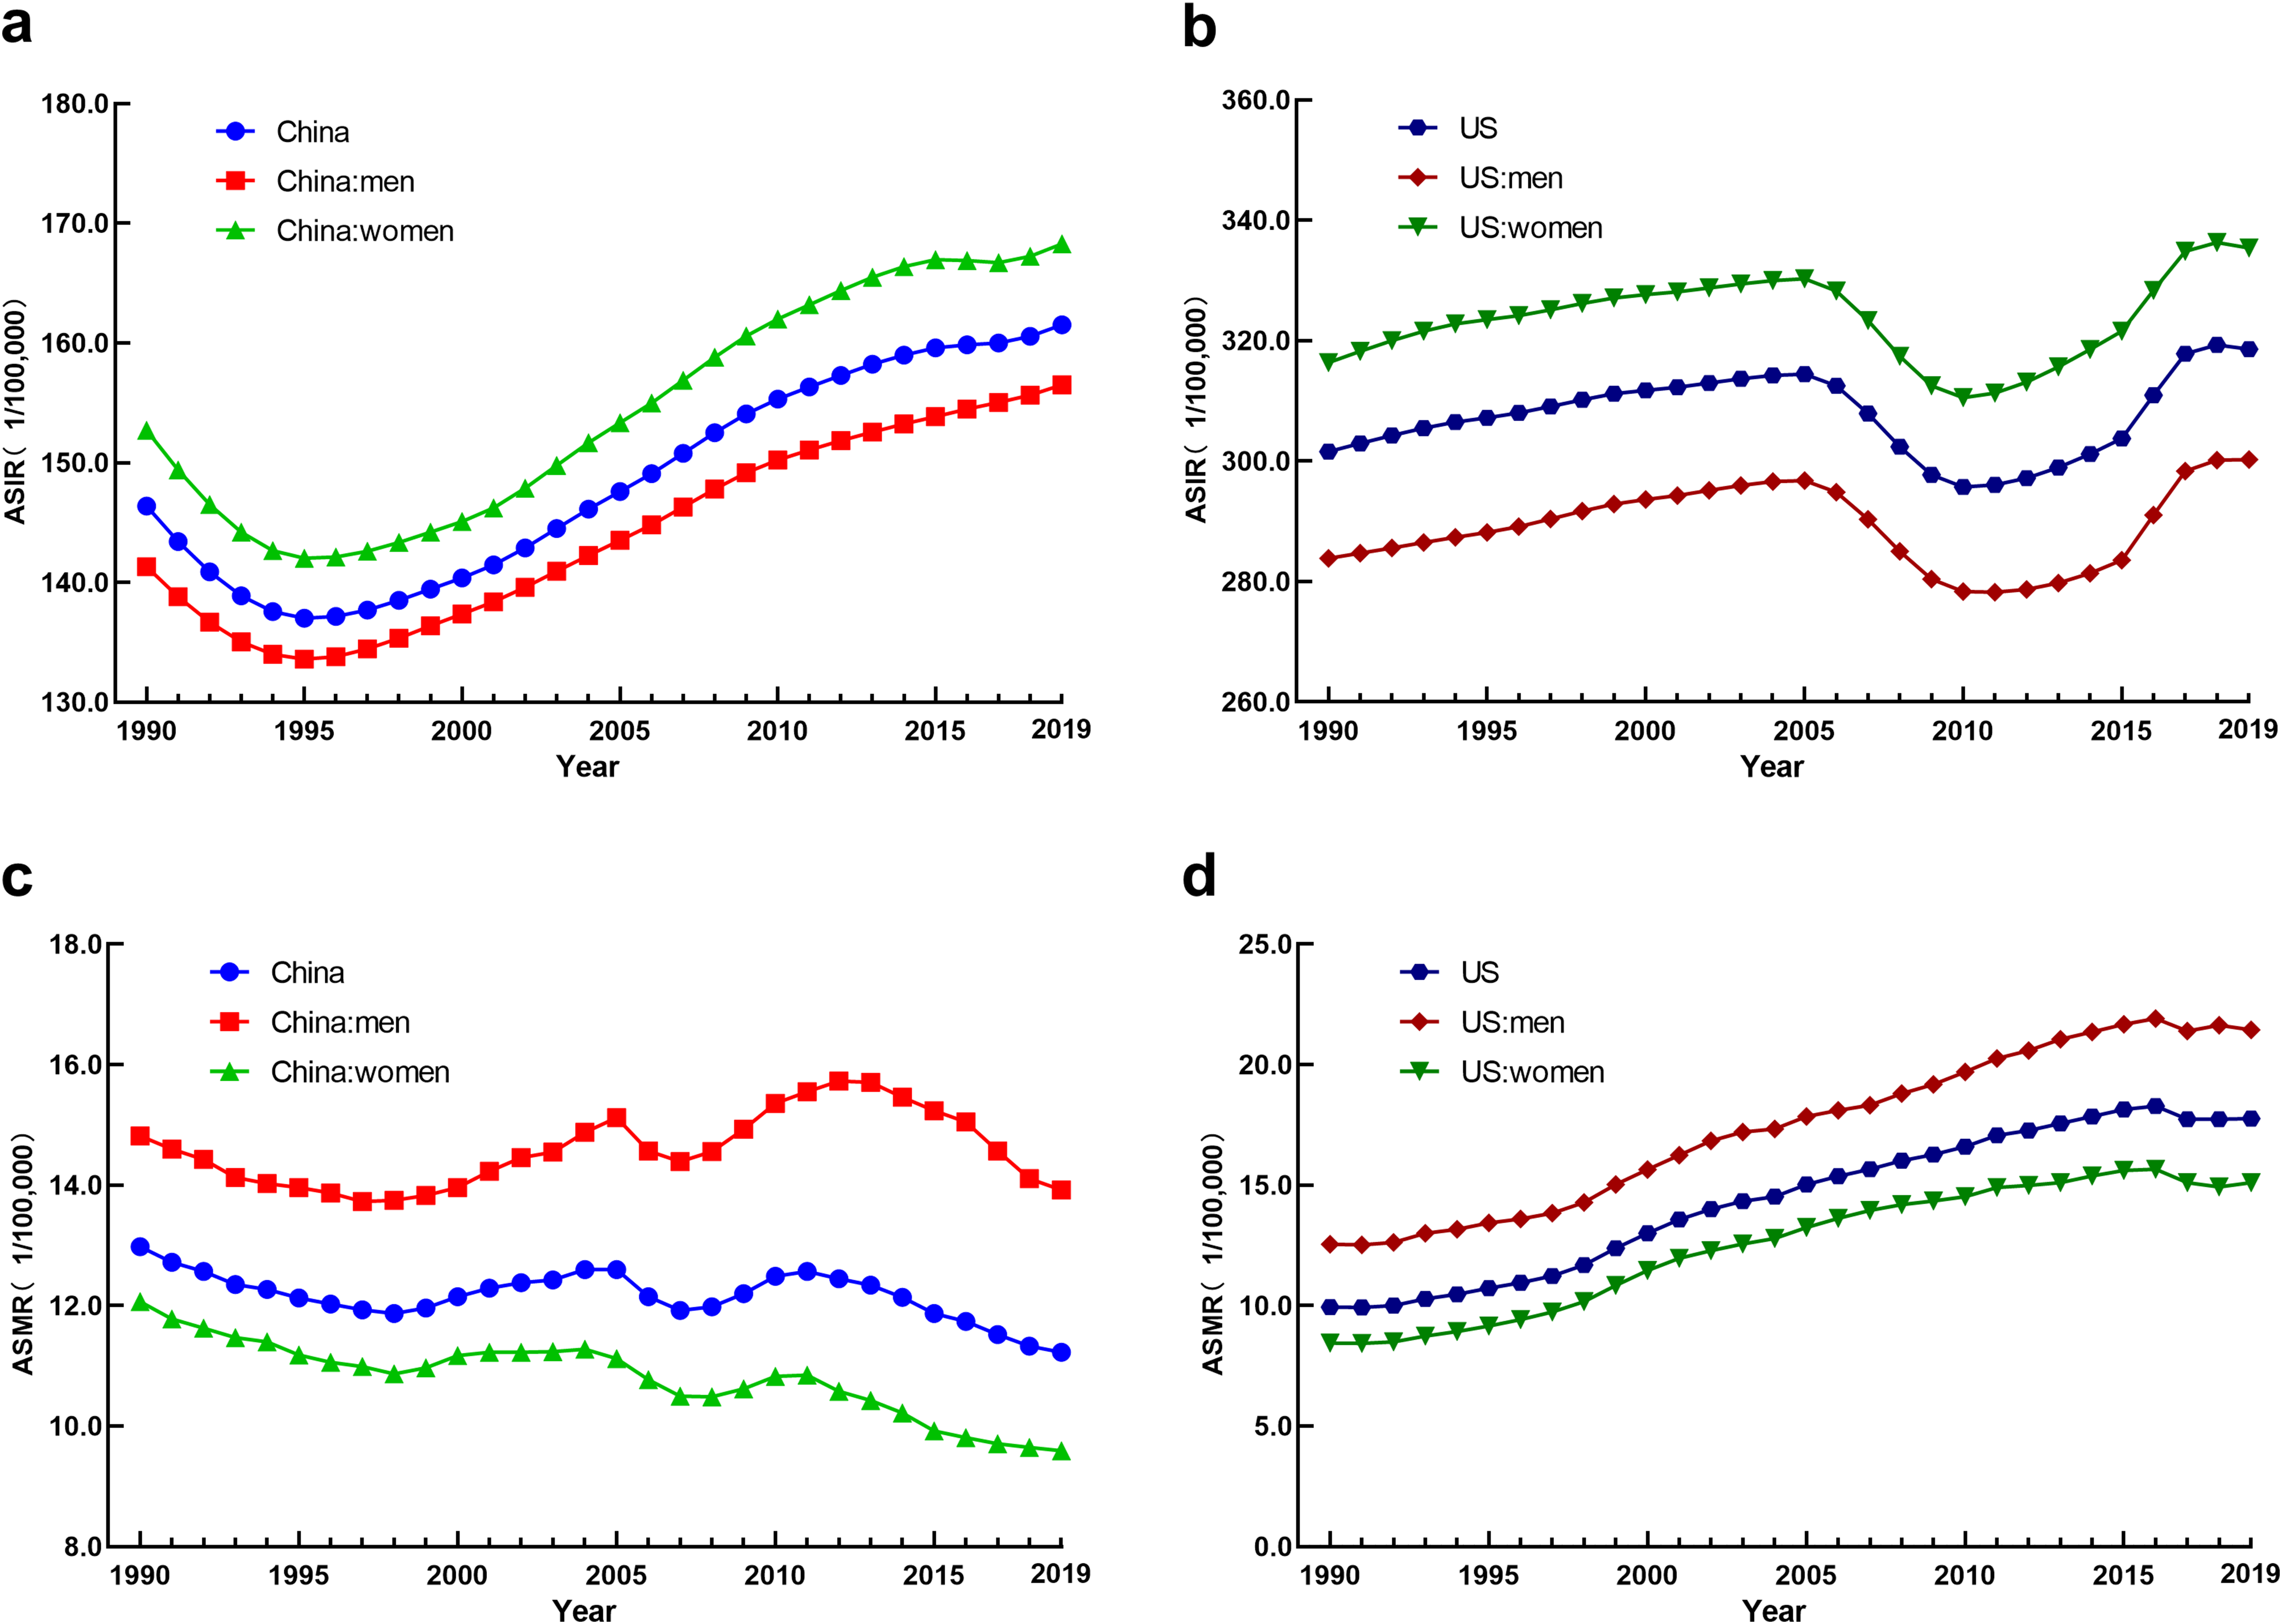 Trend analysis and prediction of the incidence and mortality of CKD in China and the US